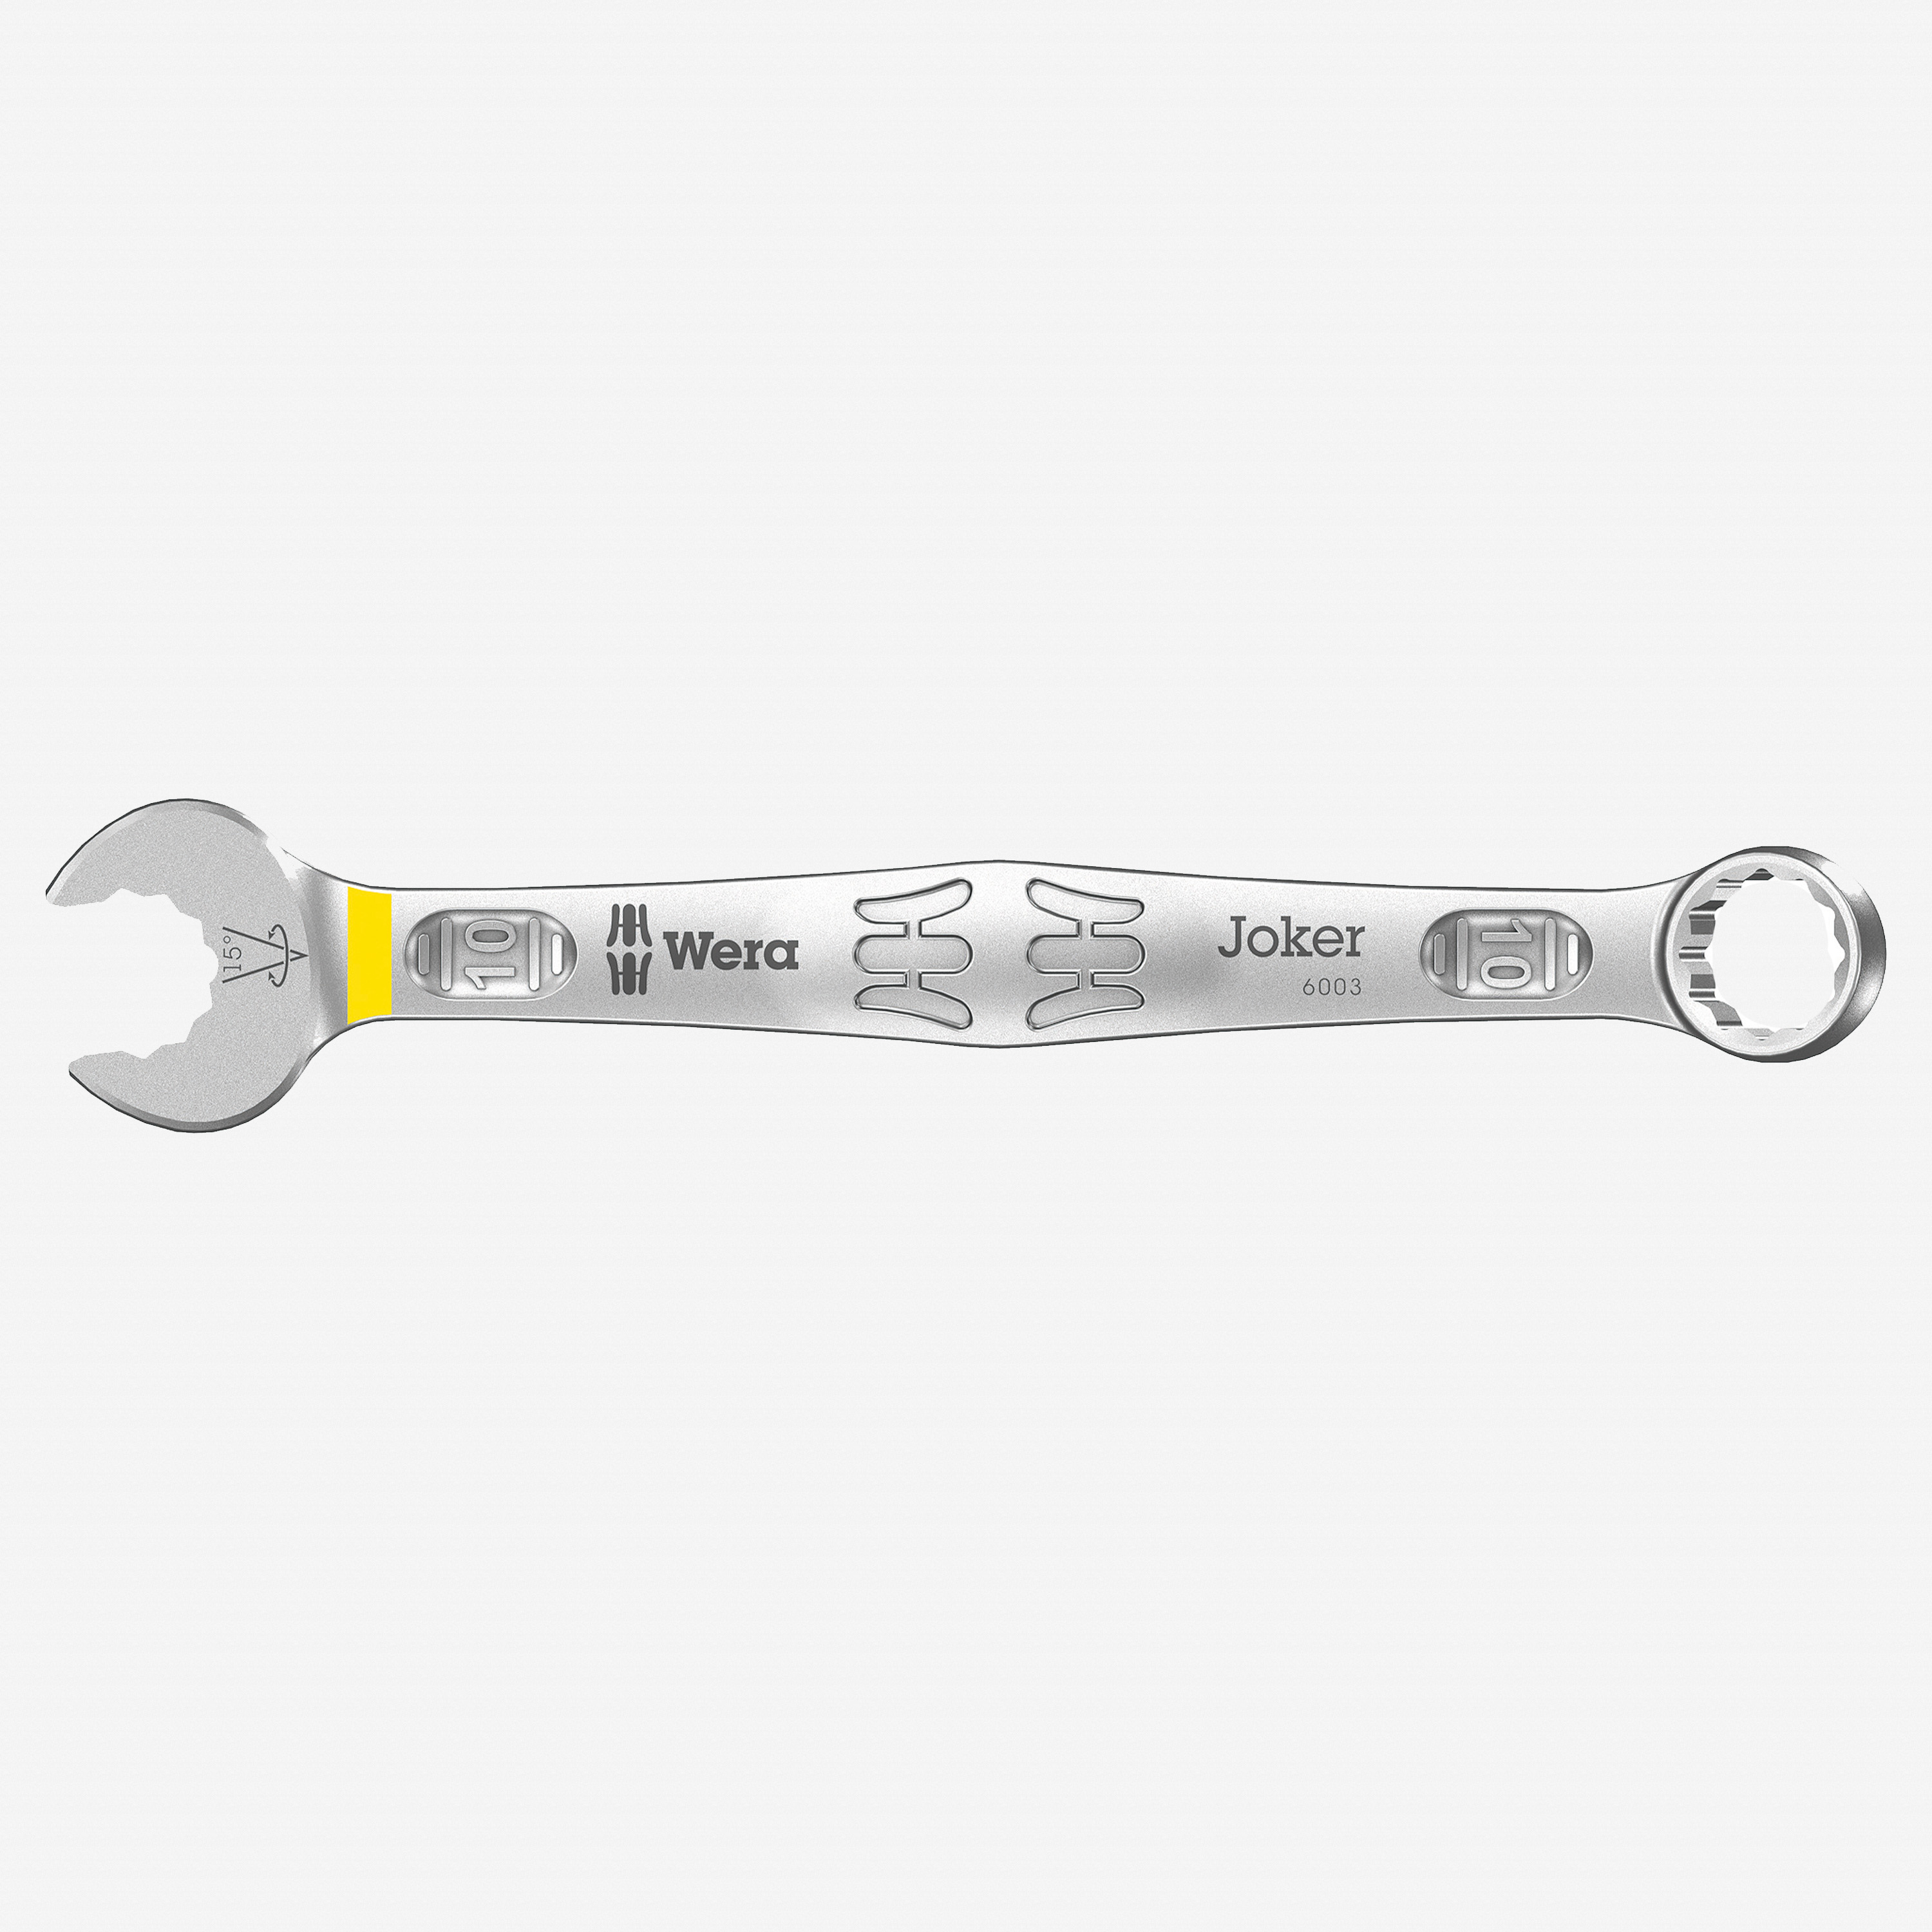 Wera 020065 Joker Combination Wrench with Switch 10mm 